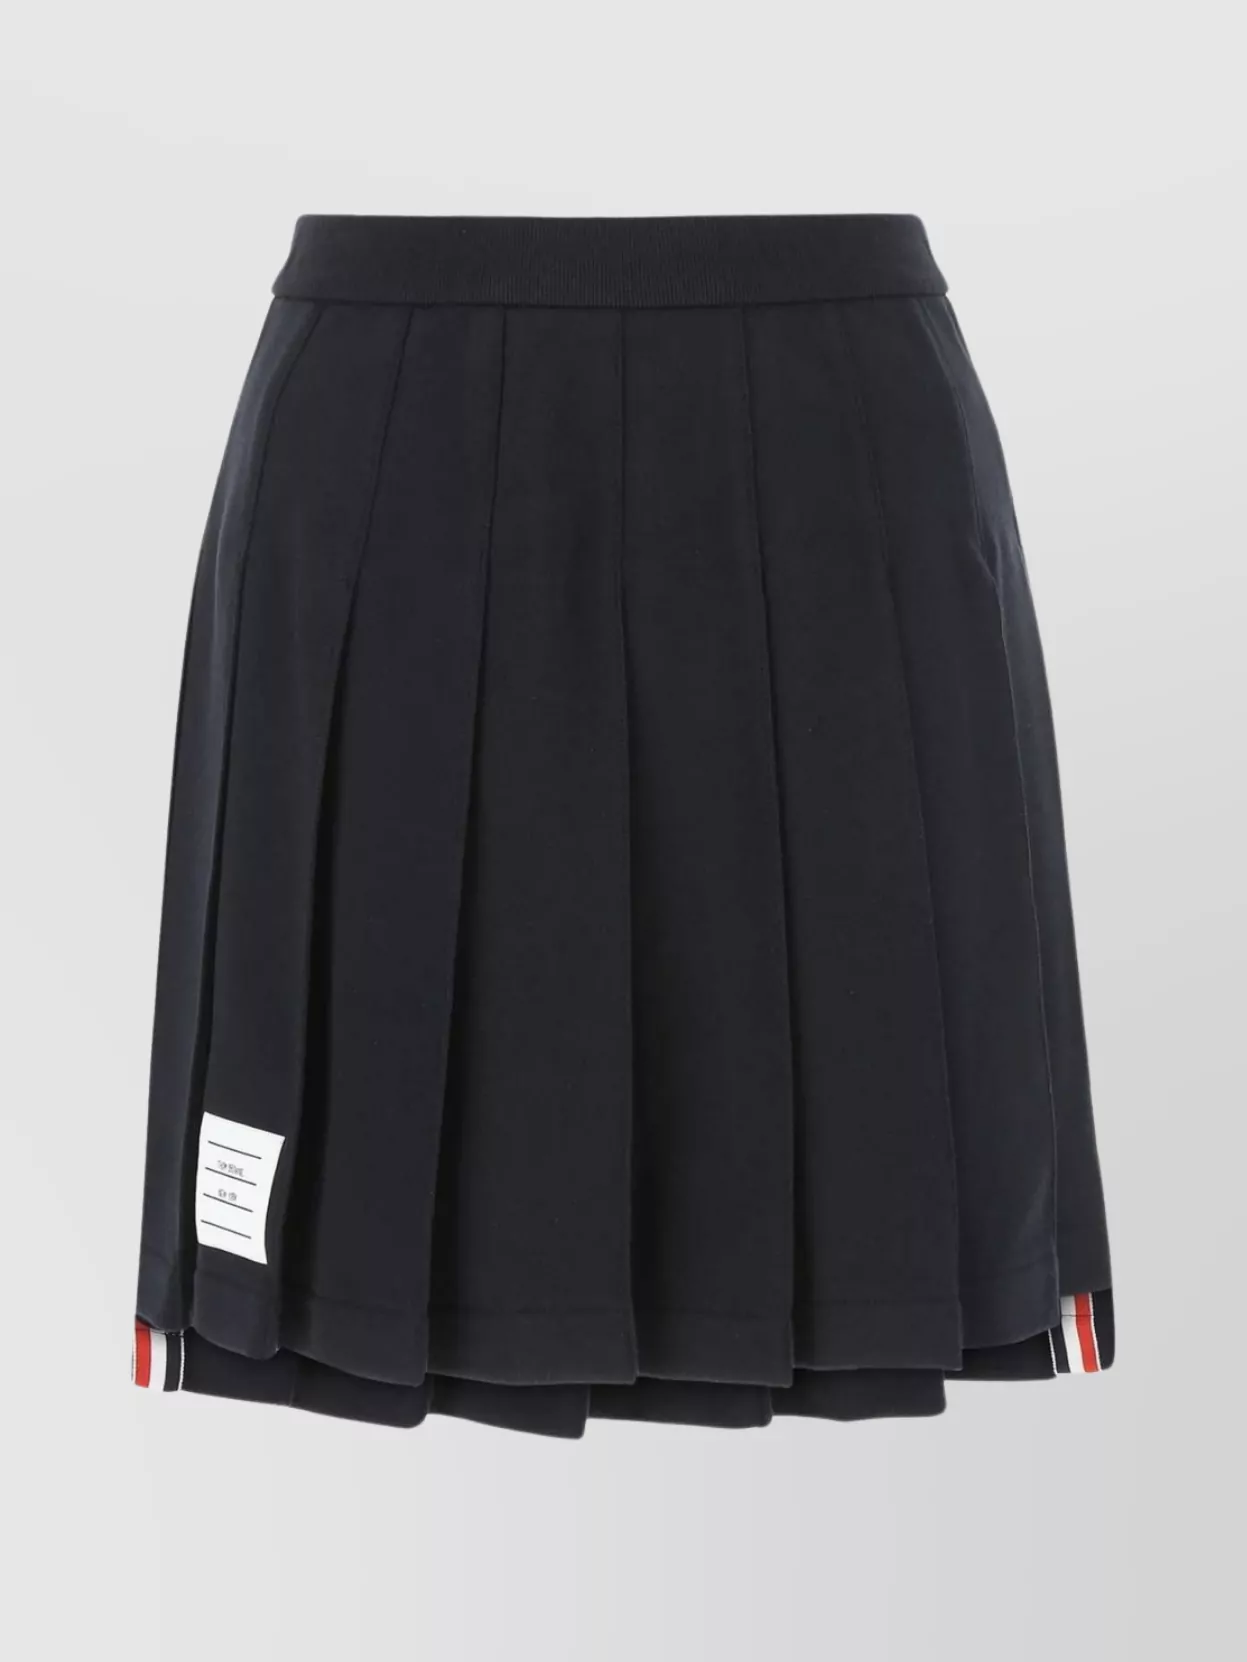 Thom Browne Mini Skirt With Pleated Design And Contrast Stripe Detail In Black